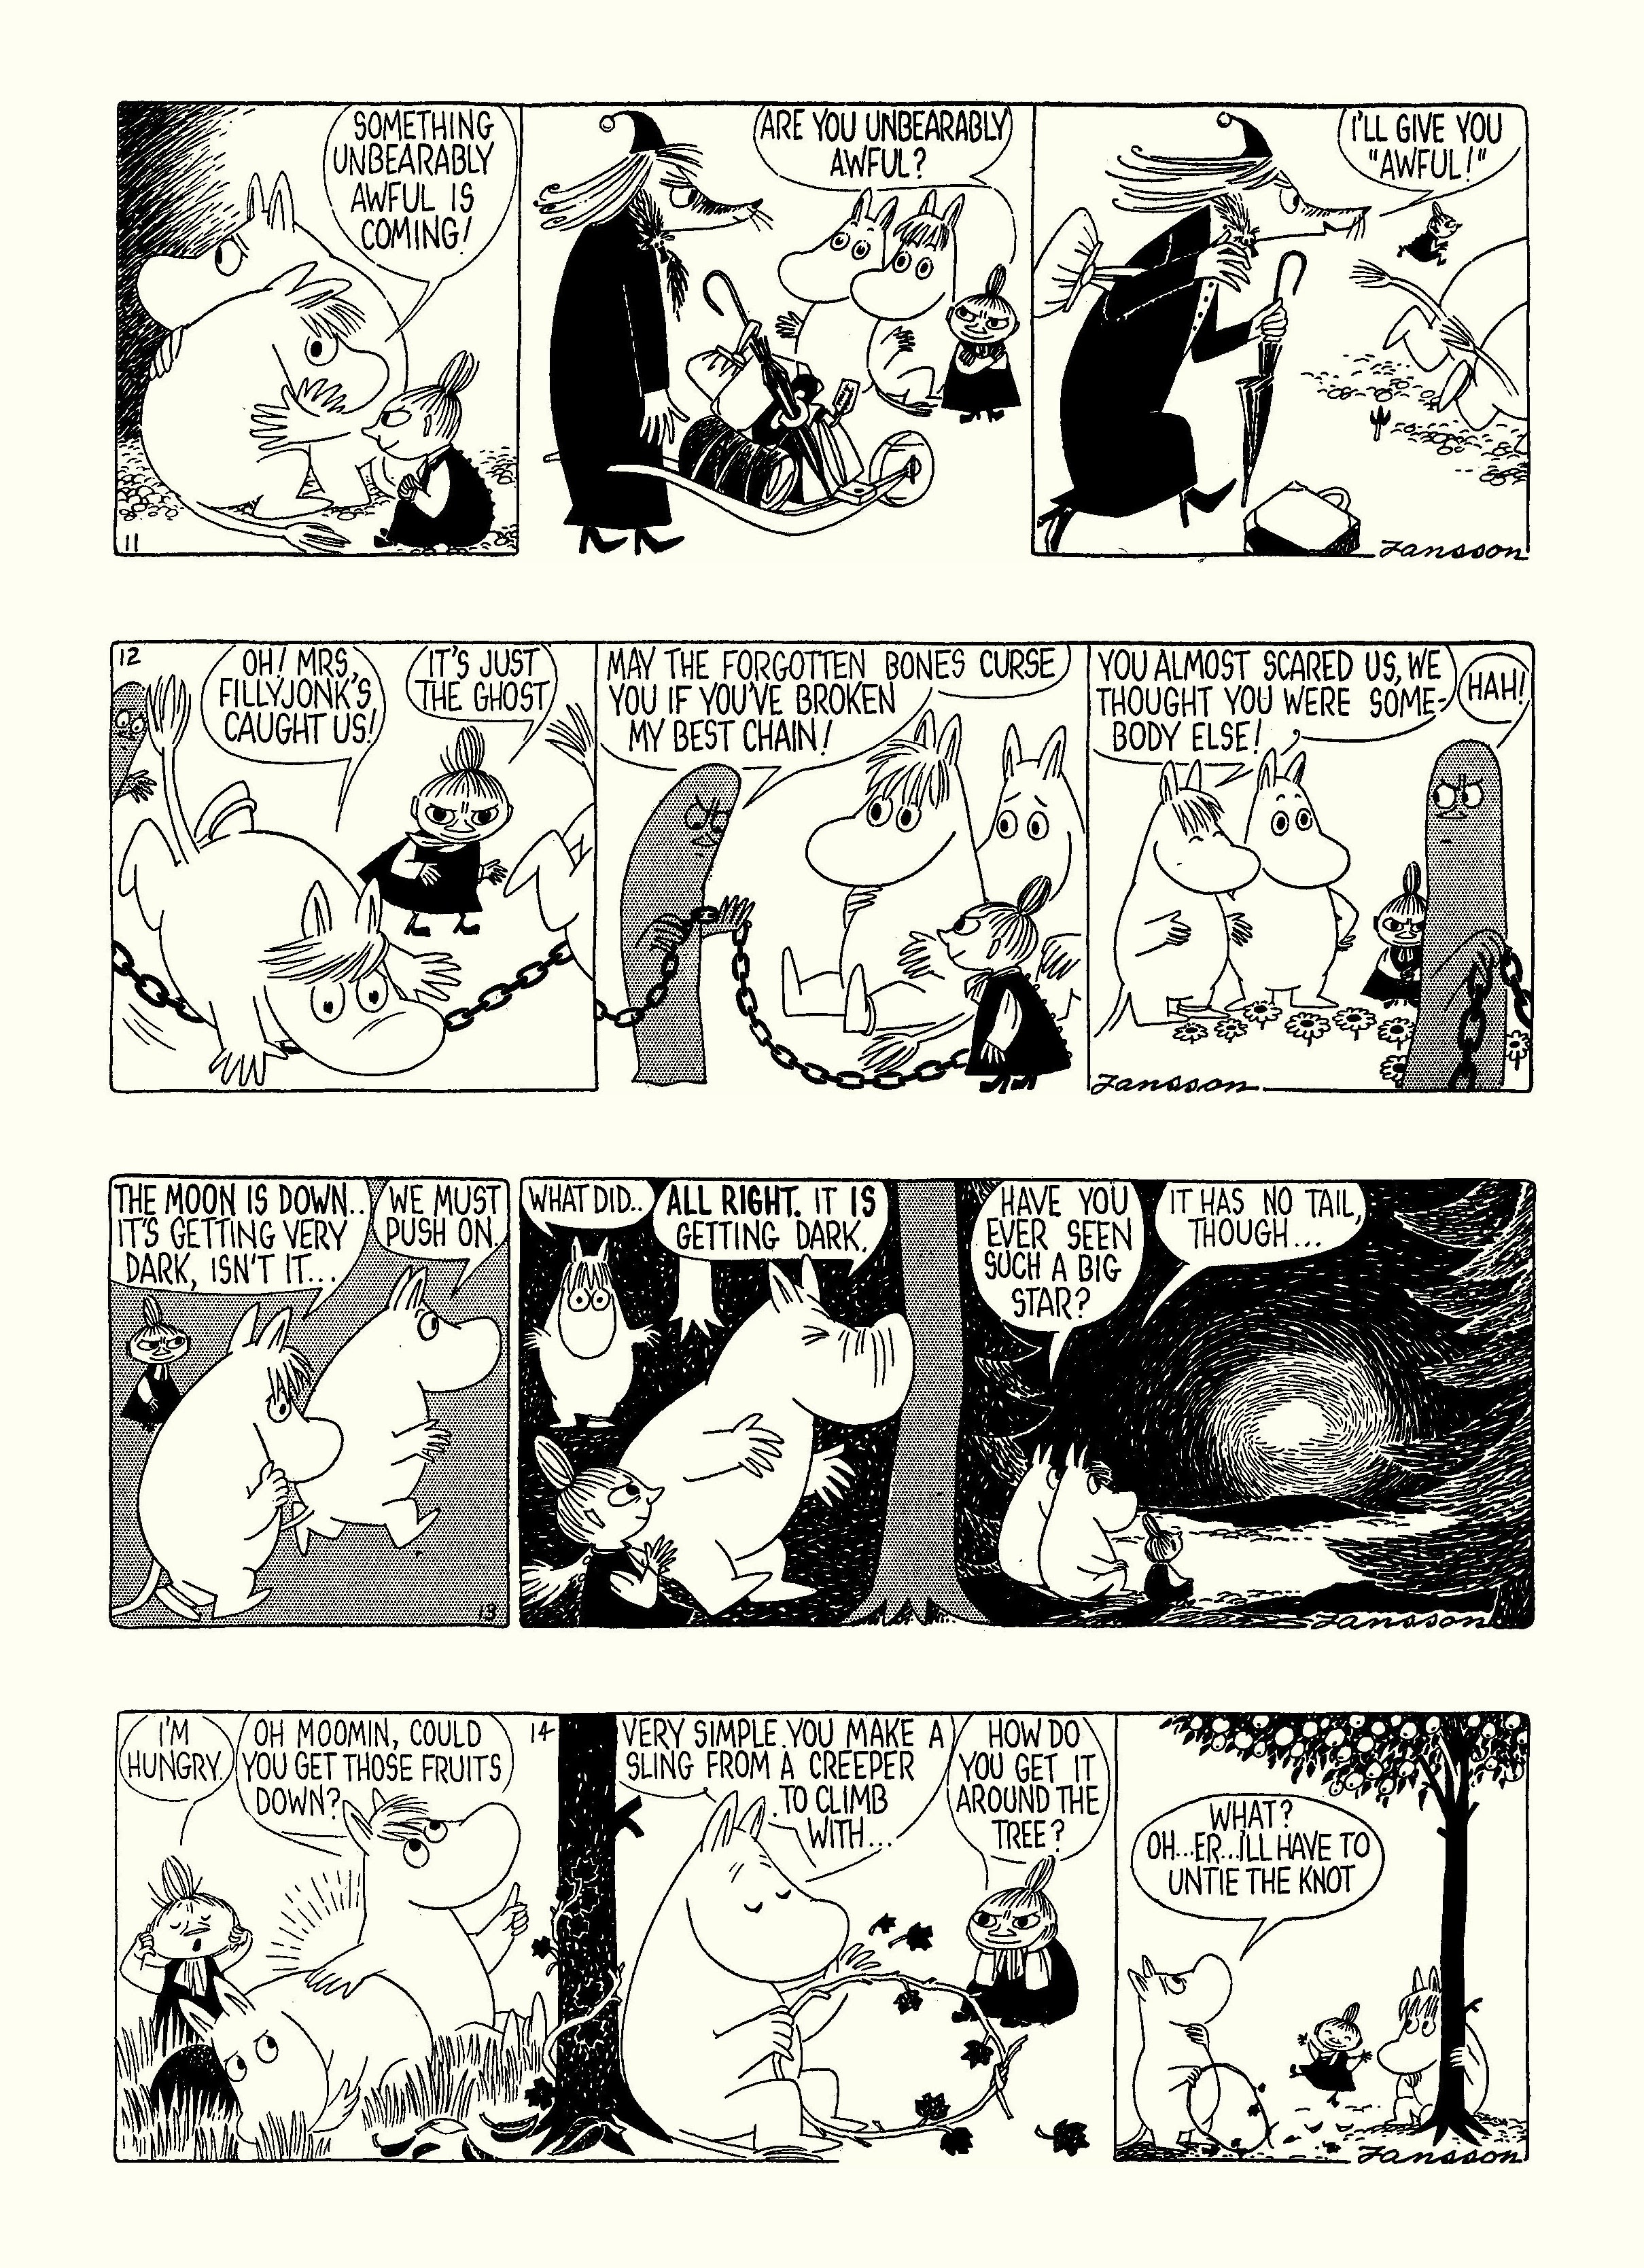 Read online Moomin: The Complete Tove Jansson Comic Strip comic -  Issue # TPB 4 - 61